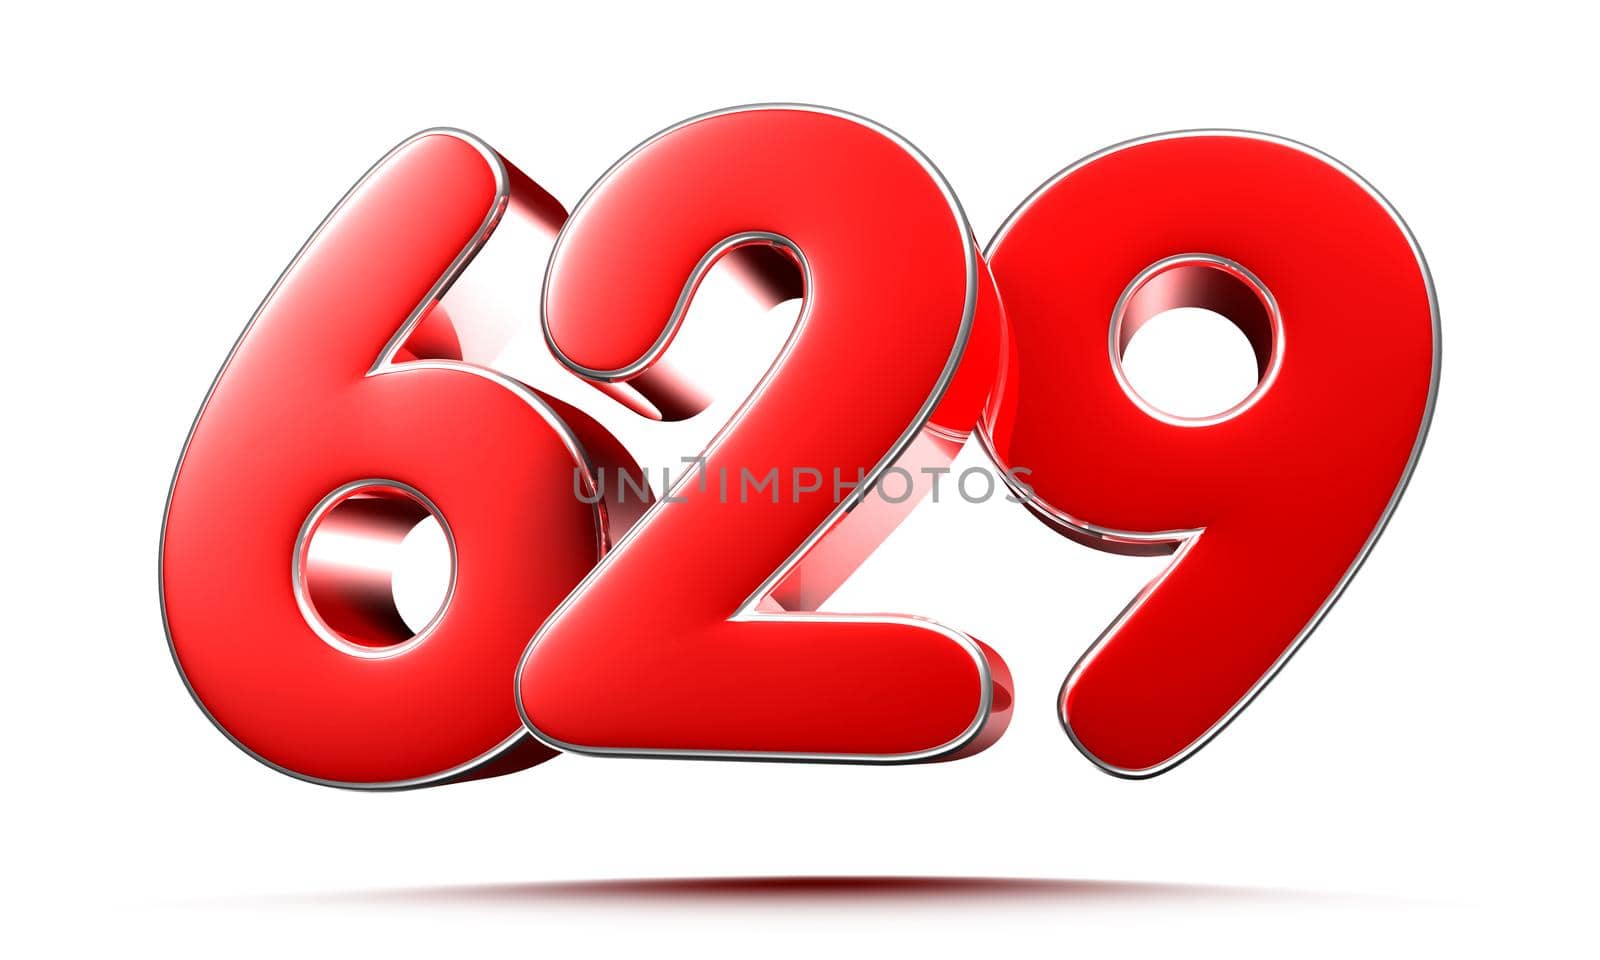 Rounded red numbers 629 on white background 3D illustration with clipping path